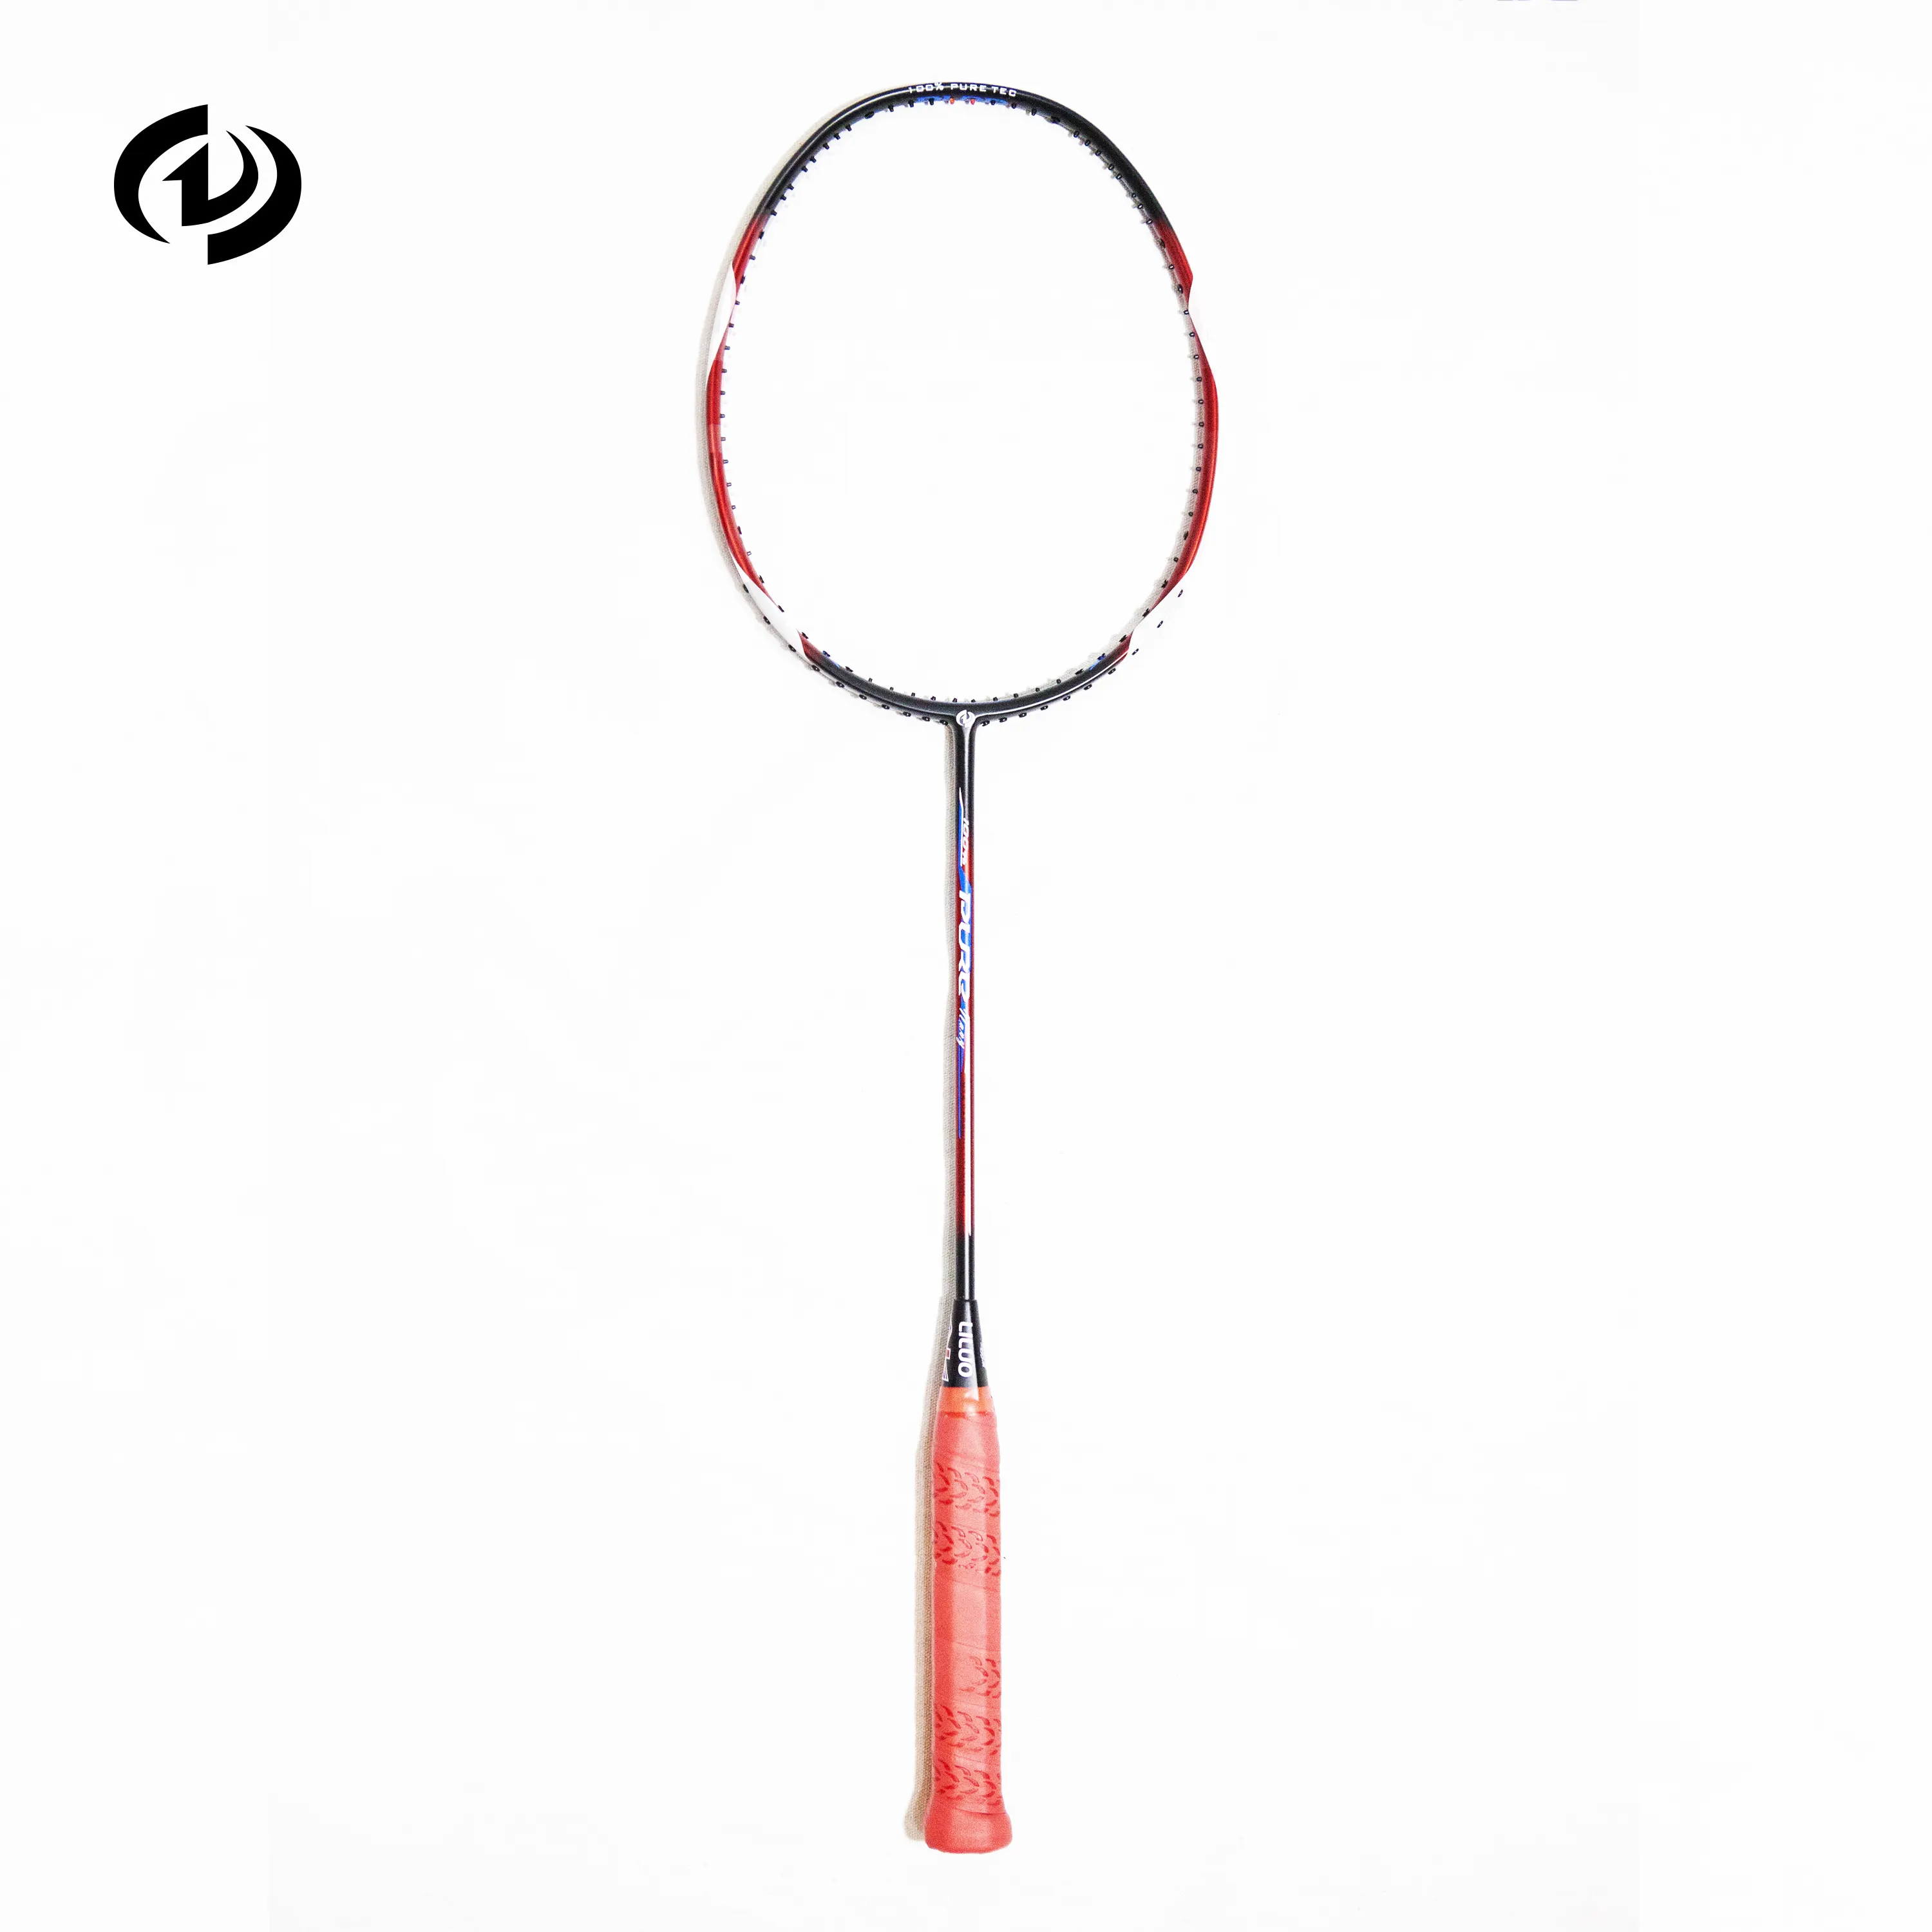 GuangDong Province Manufacture with Japanese Toray Graphite Carbon Fiber OEM ODM Customized Badminton Racket